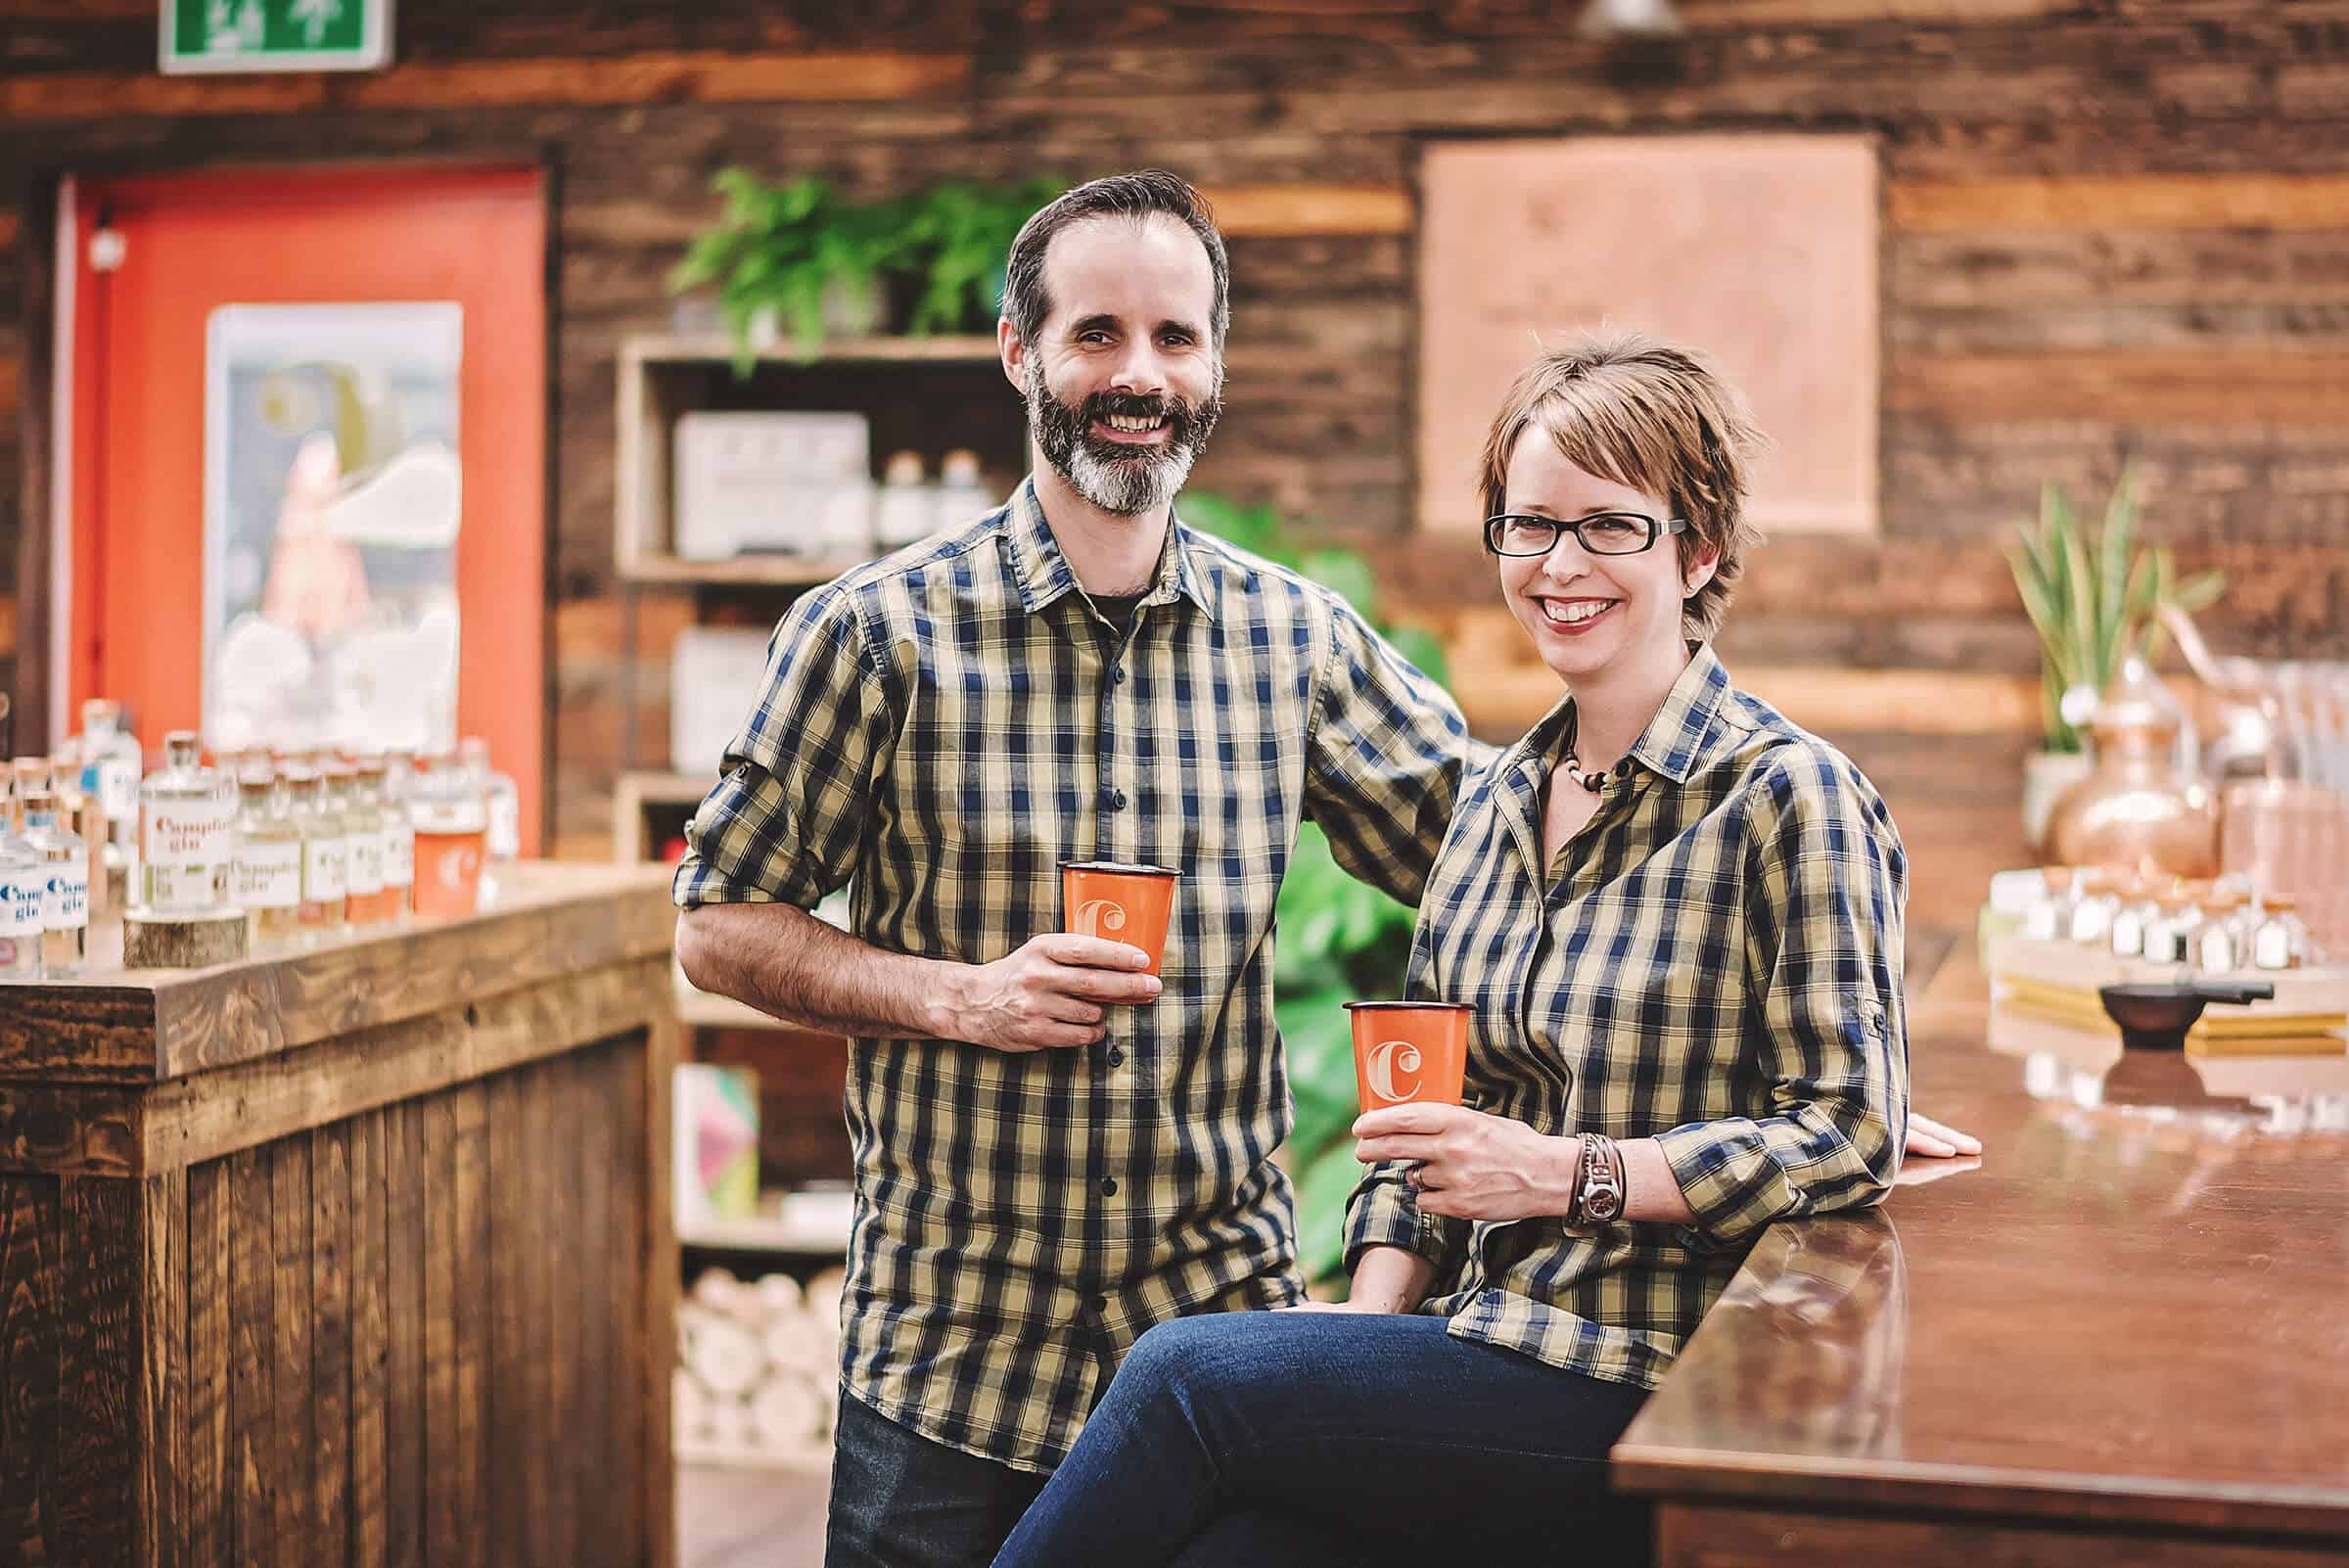 Puddingstone Distillery founders, Ben and Kate Marston